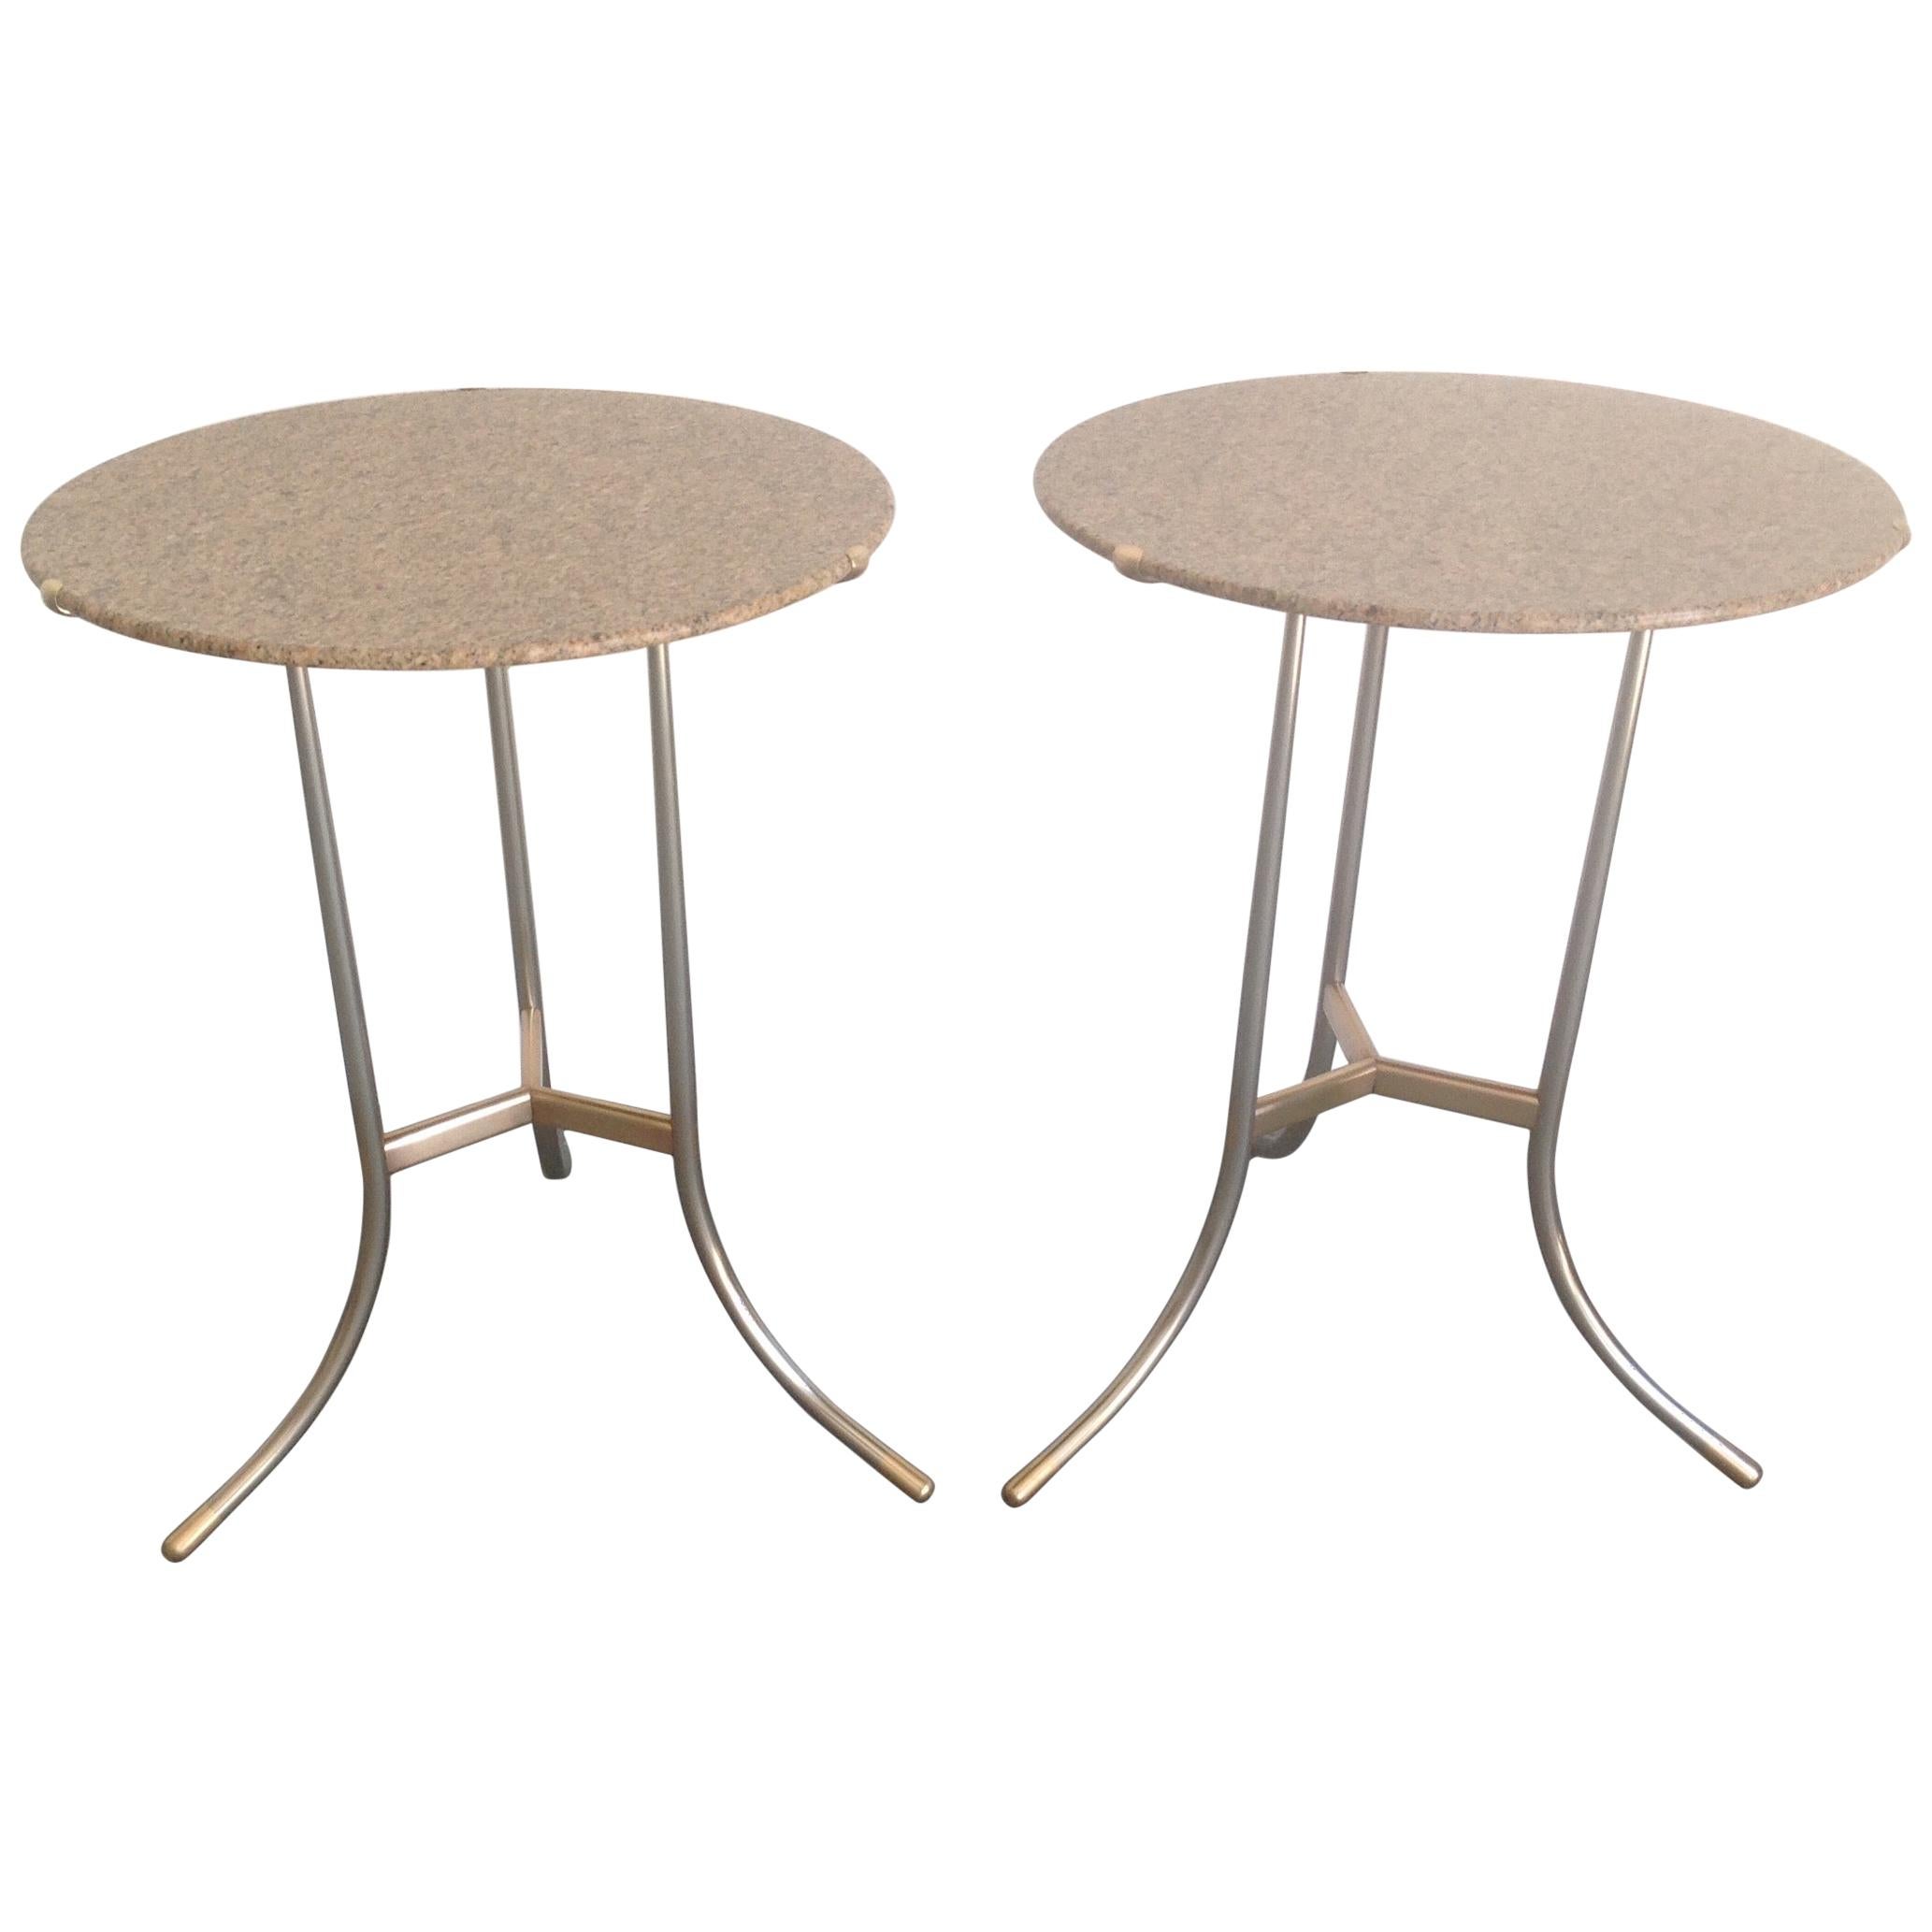 Cedric Hartman Pair of Granite and Mixed Metal Side Tables For Sale